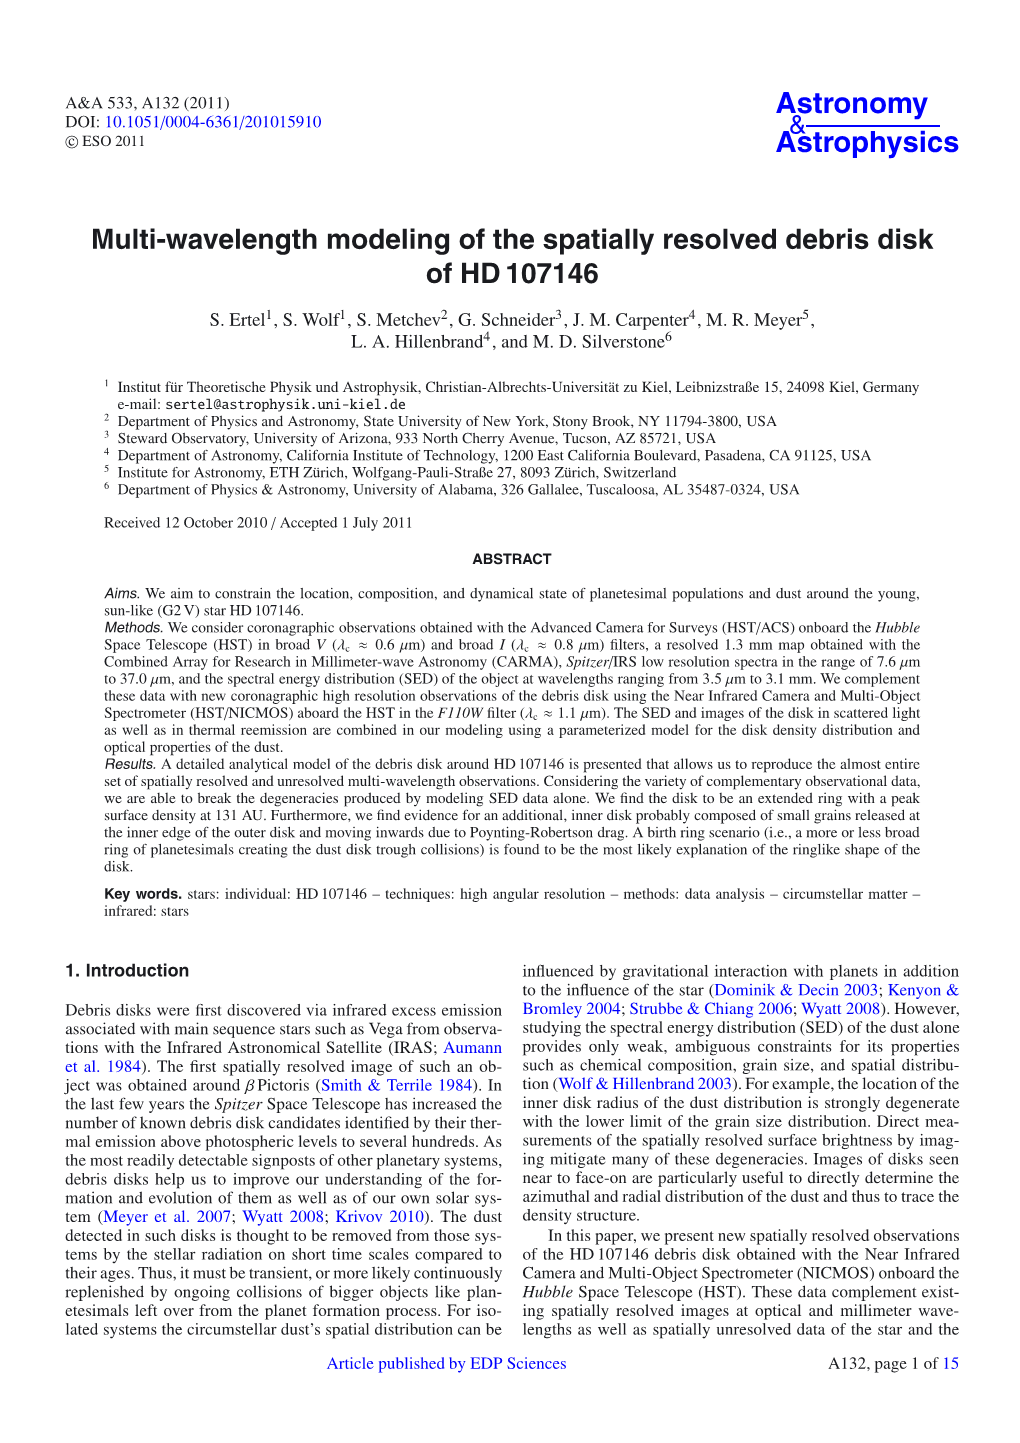 Multi-Wavelength Modeling of the Spatially Resolved Debris Disk of HD 107146